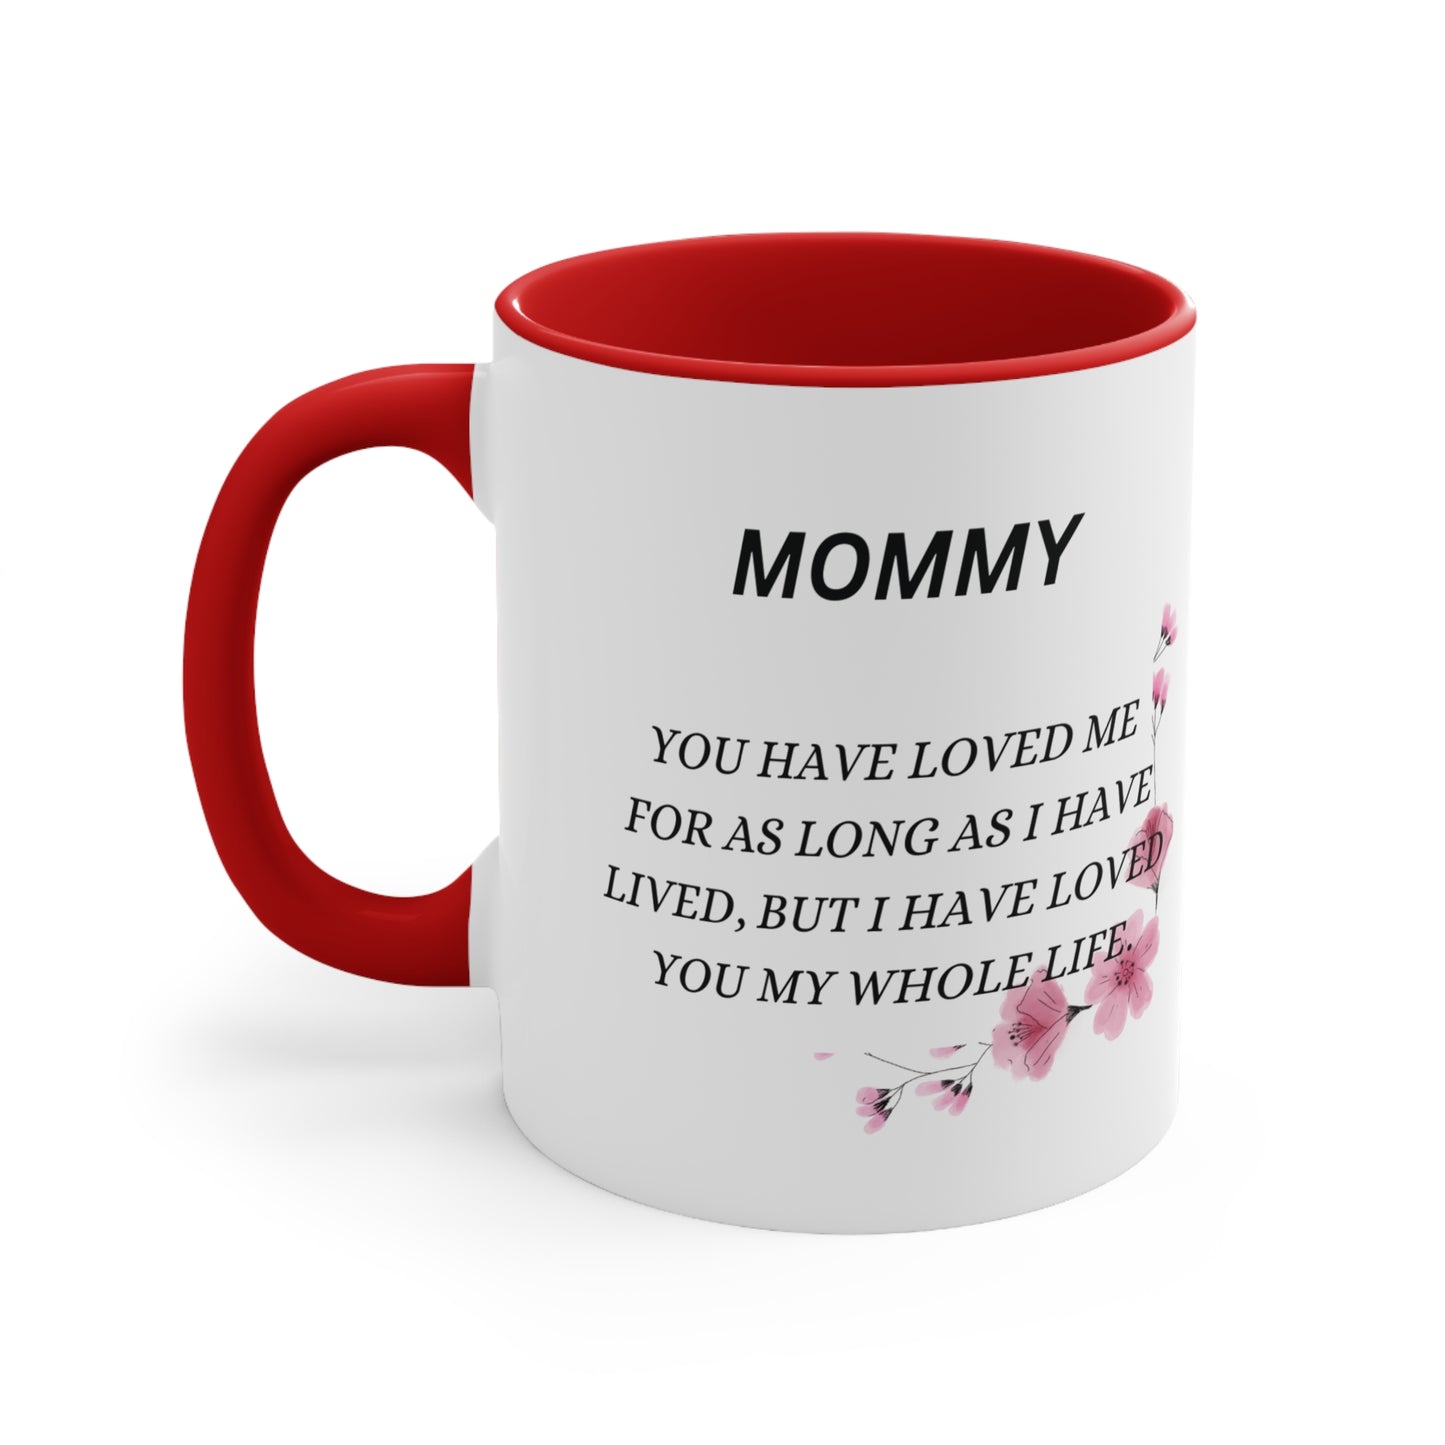 Sentimental Mom Gift 11oz Accent Coffee Mug with 'Mommy Loved You Whole Life' inscription0